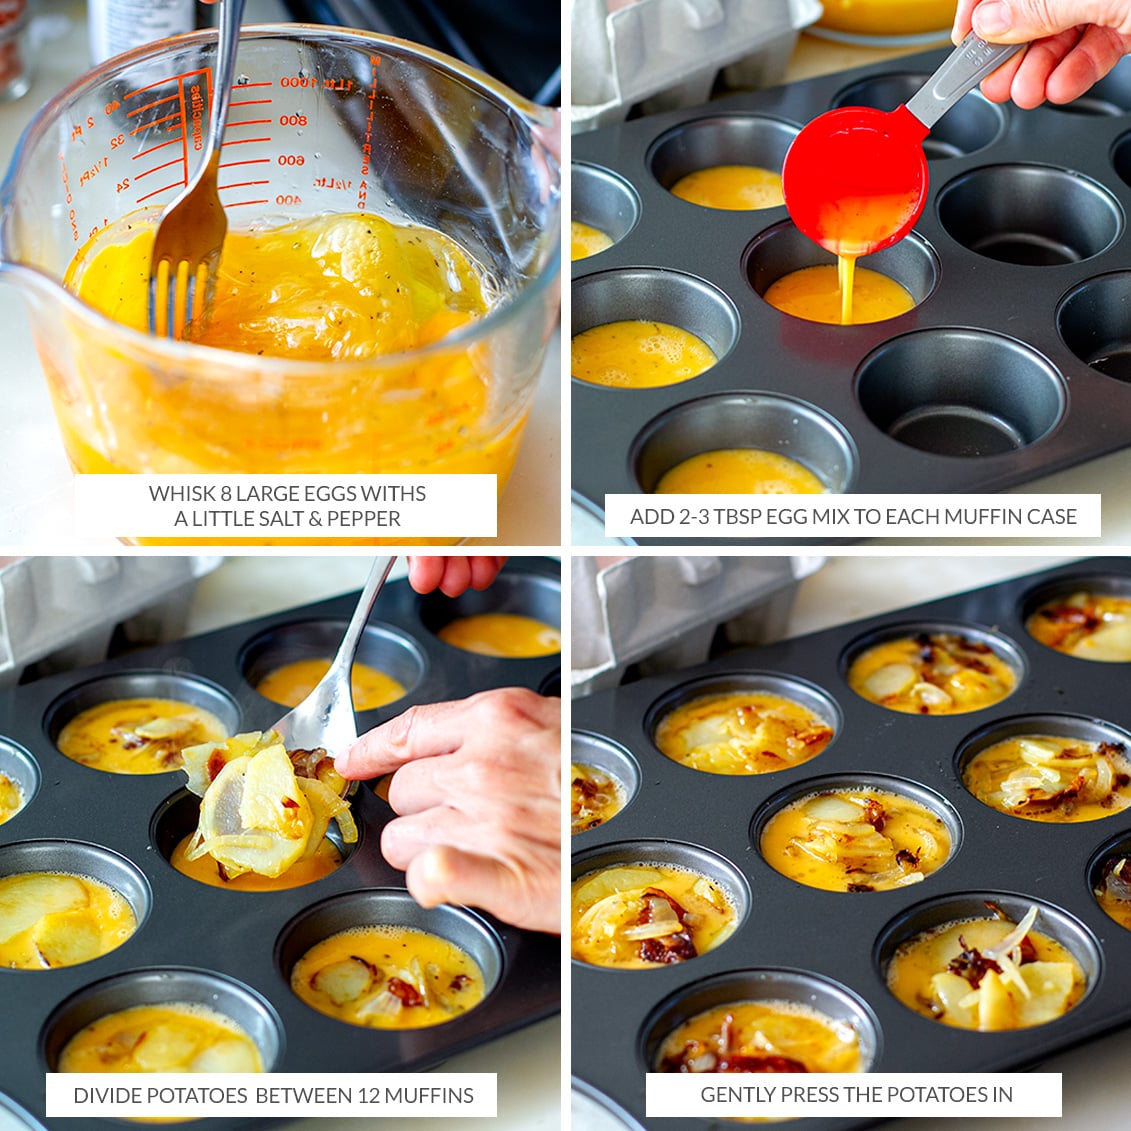 Making the egg mixture and assembling egg muffins in a baking pan